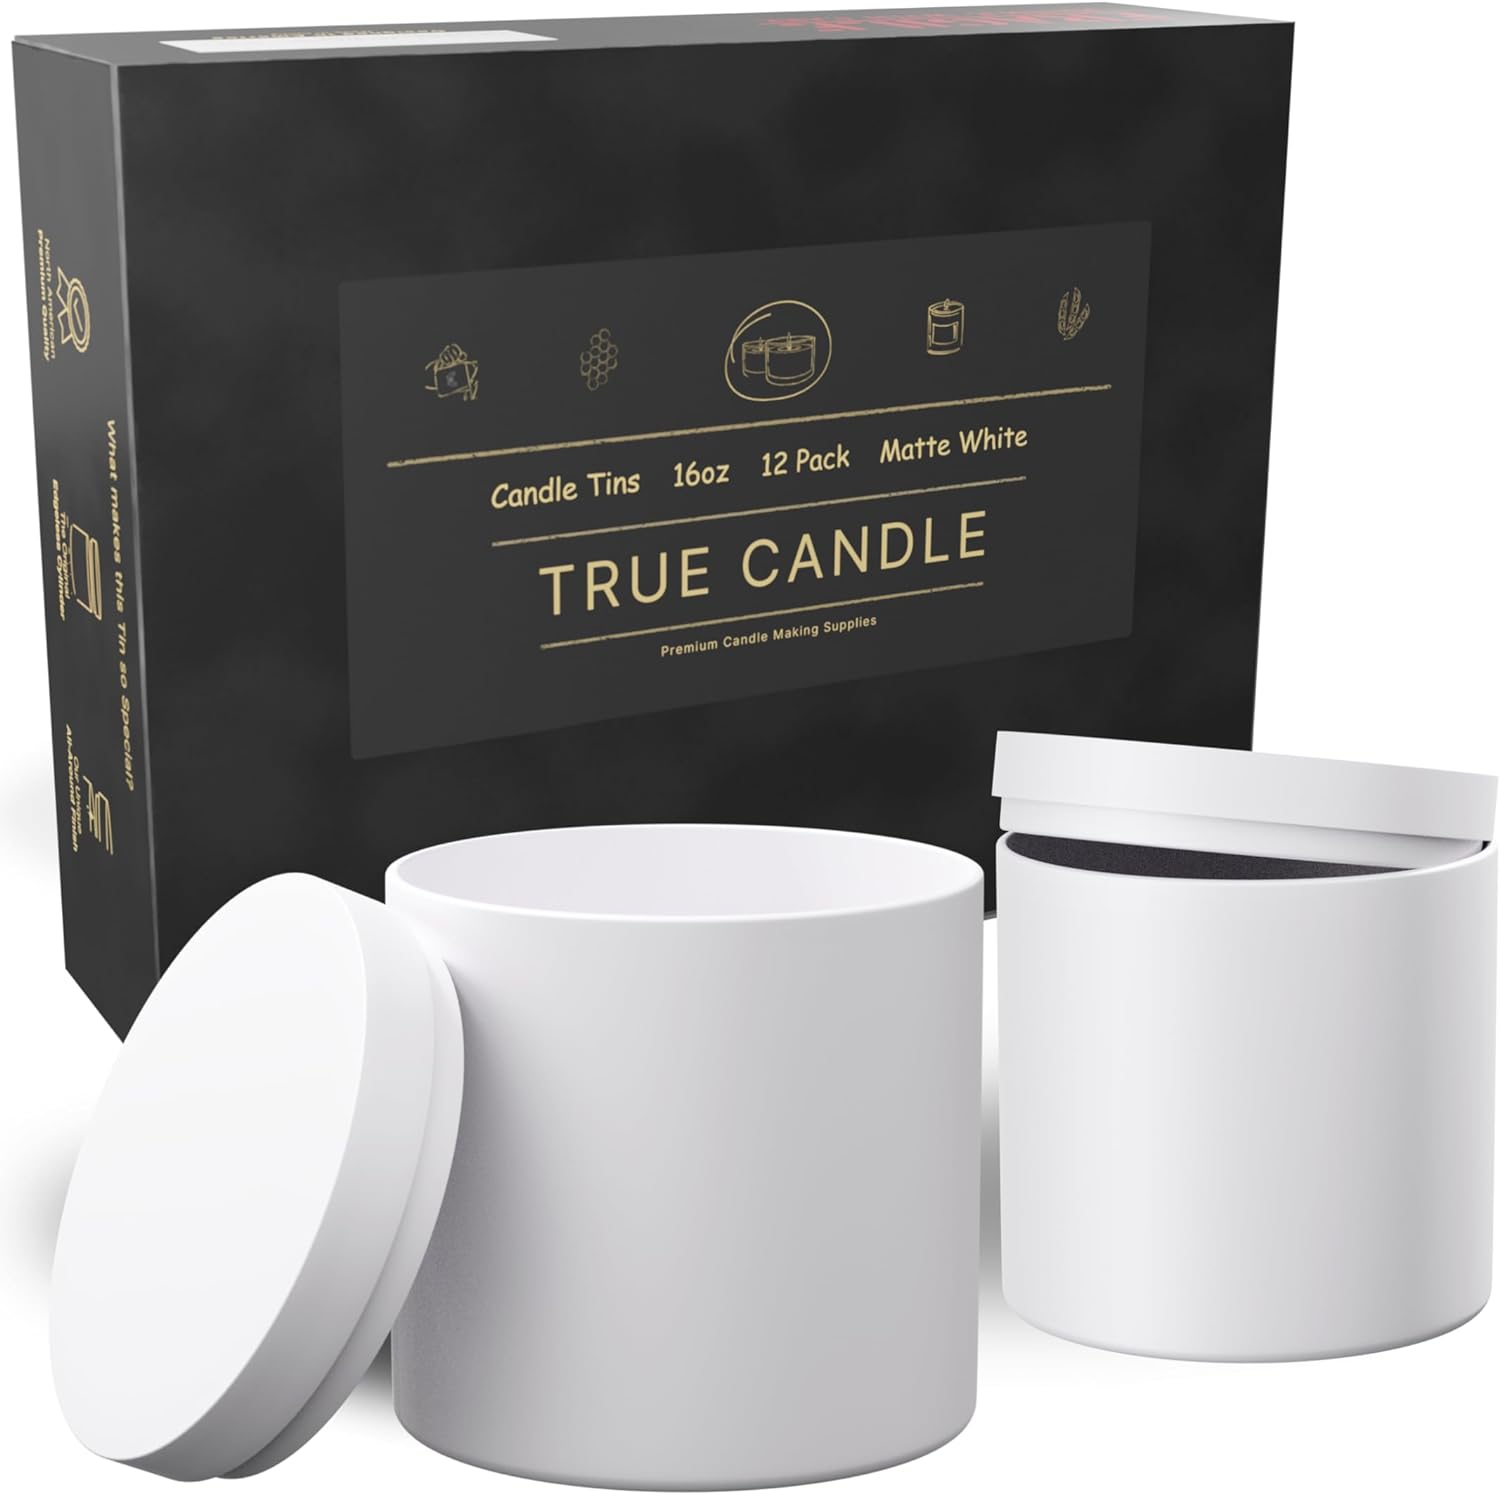 True Candle 24-pack 4oz Matte White Candle Tins Edgeless Cylinder